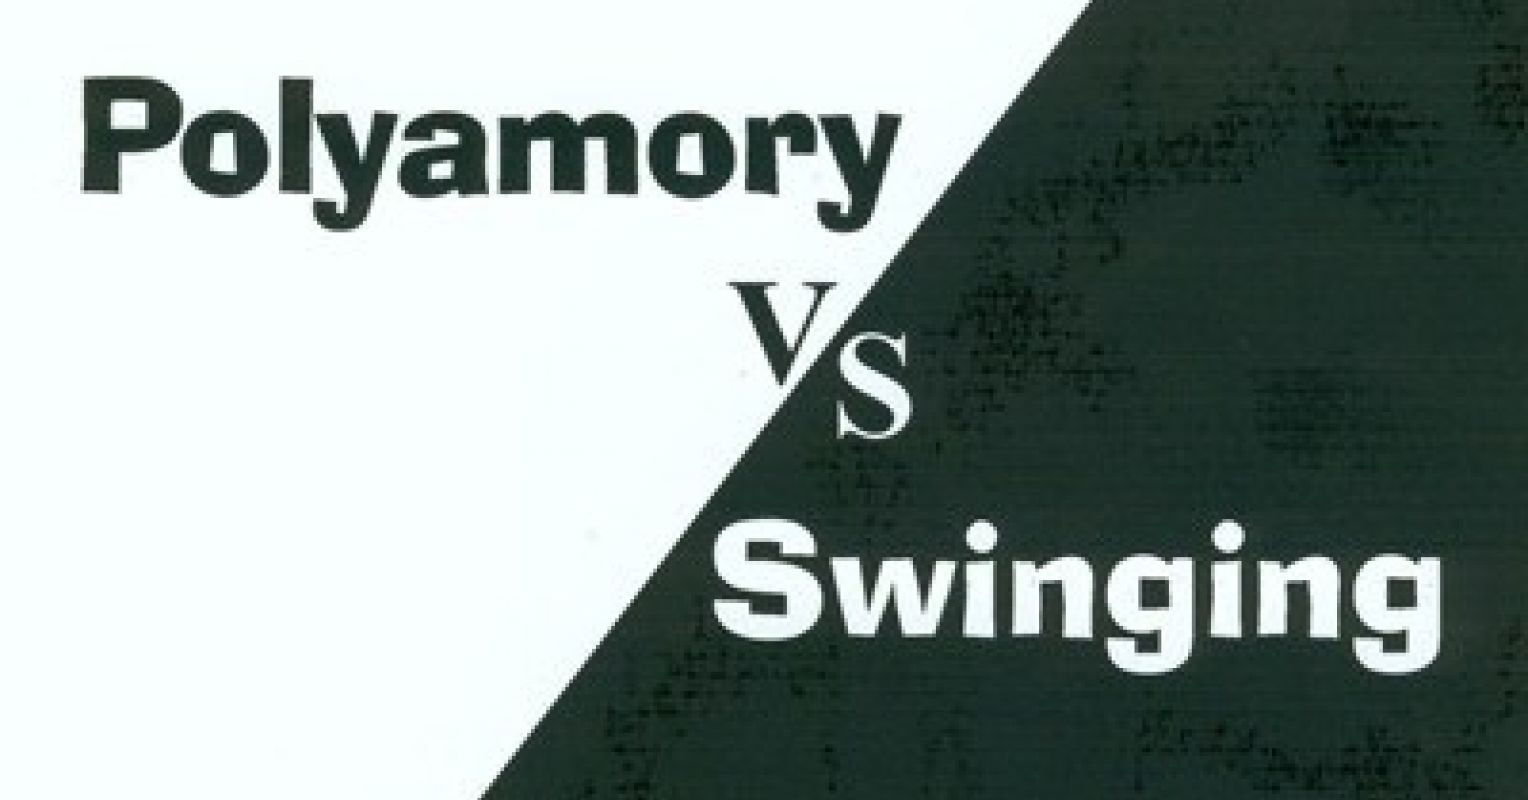 Whos More Stigmatized Swingers or Polyamorists? Psychology Today image pic